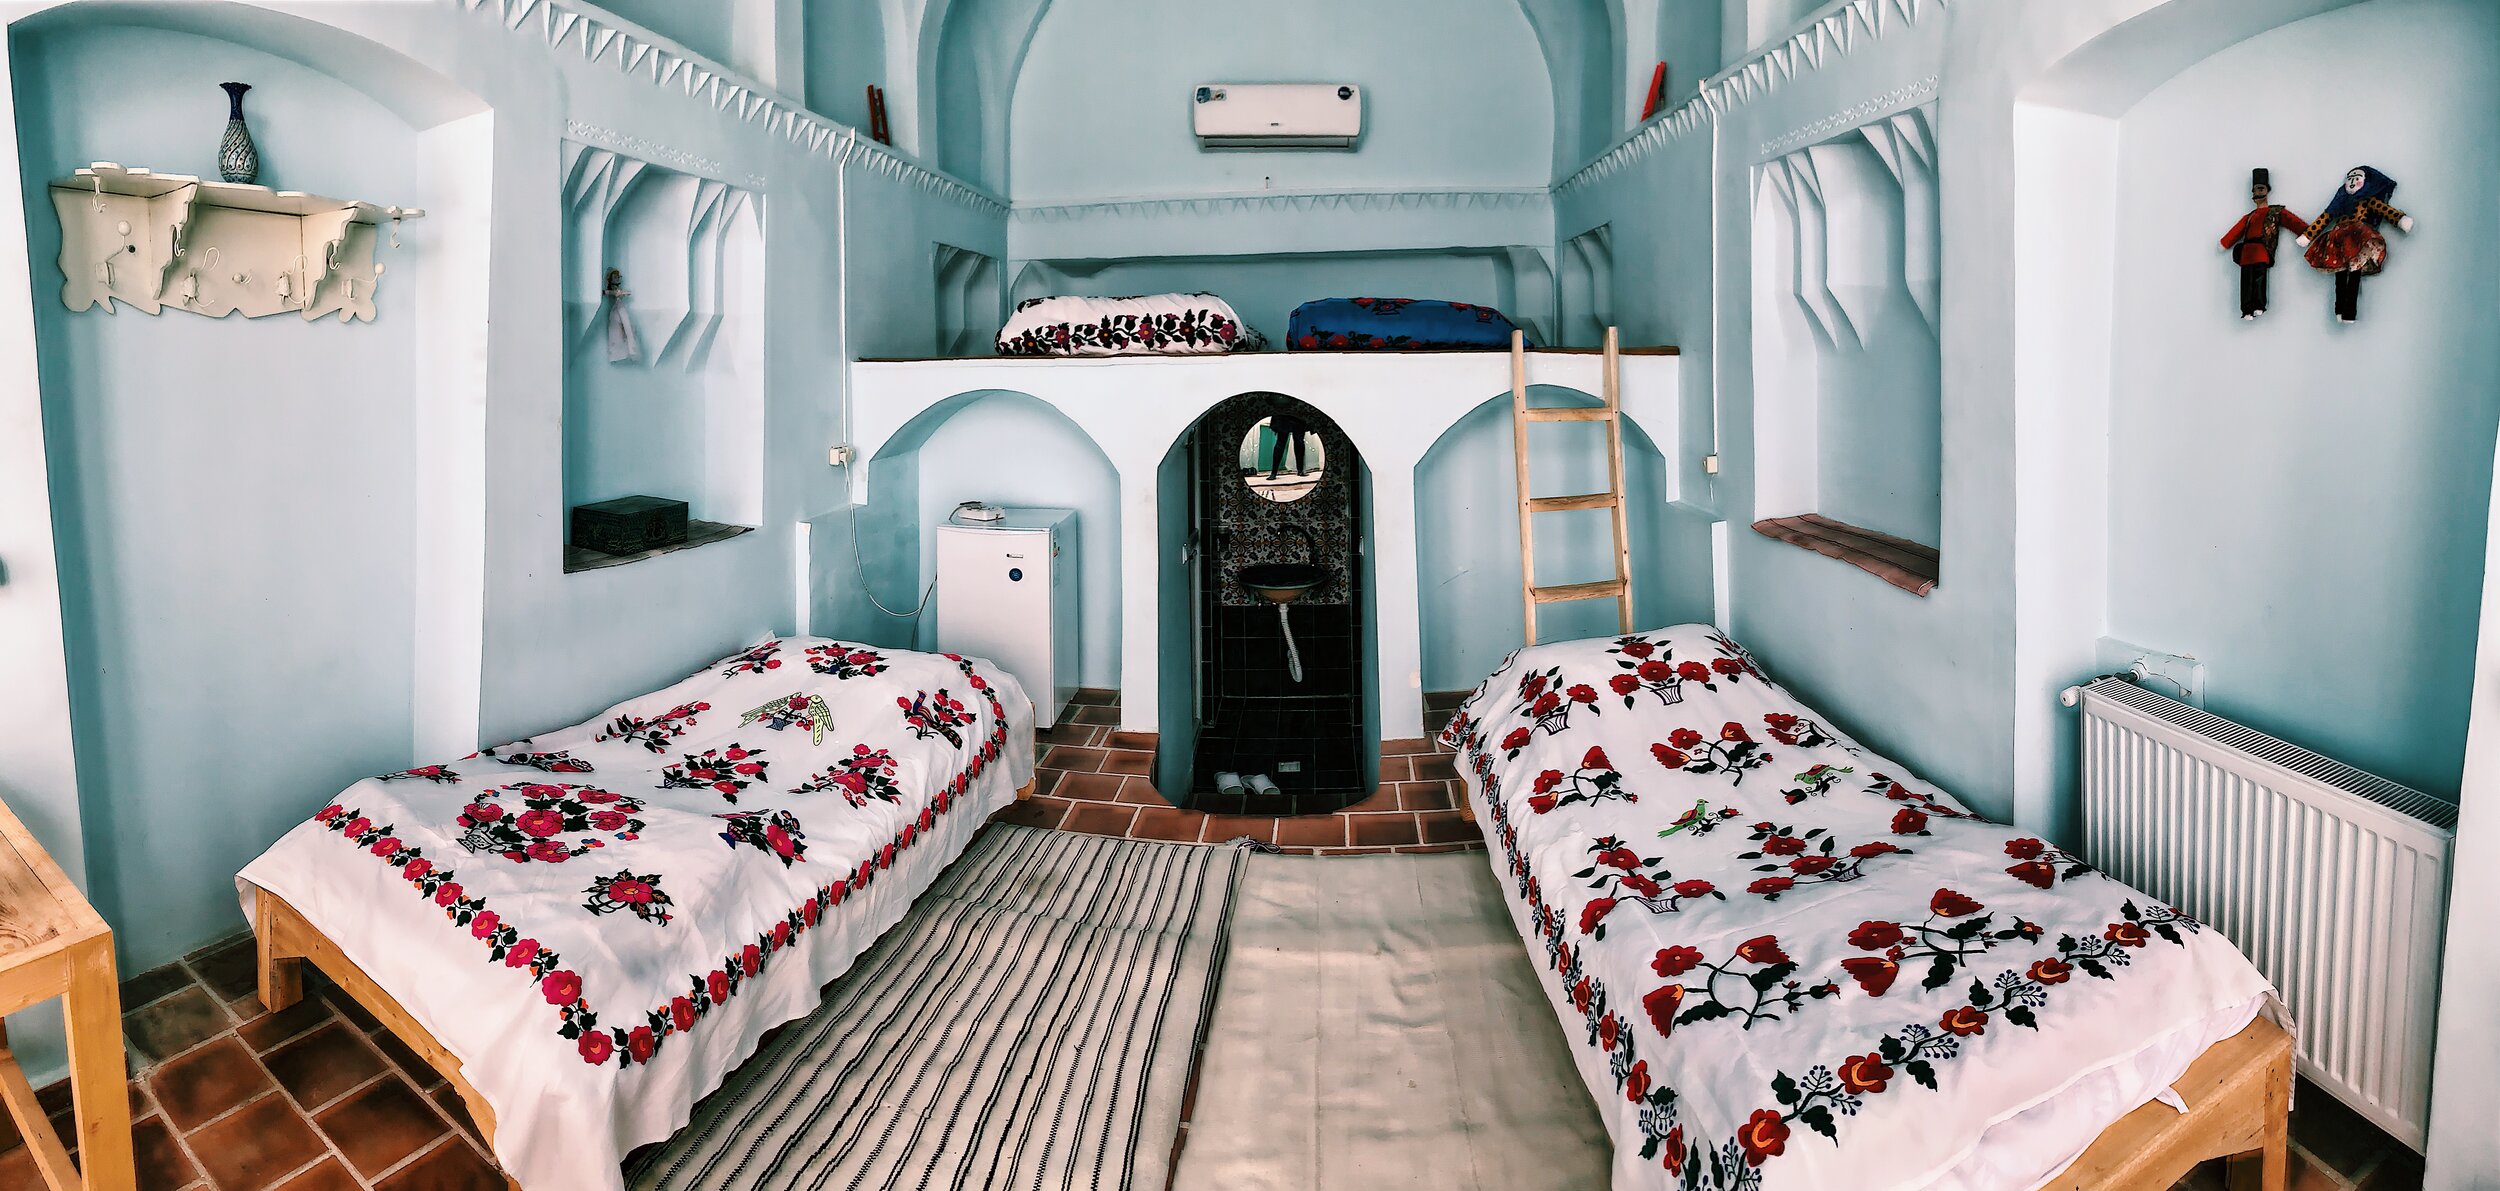 Bed and breakfast in Iran